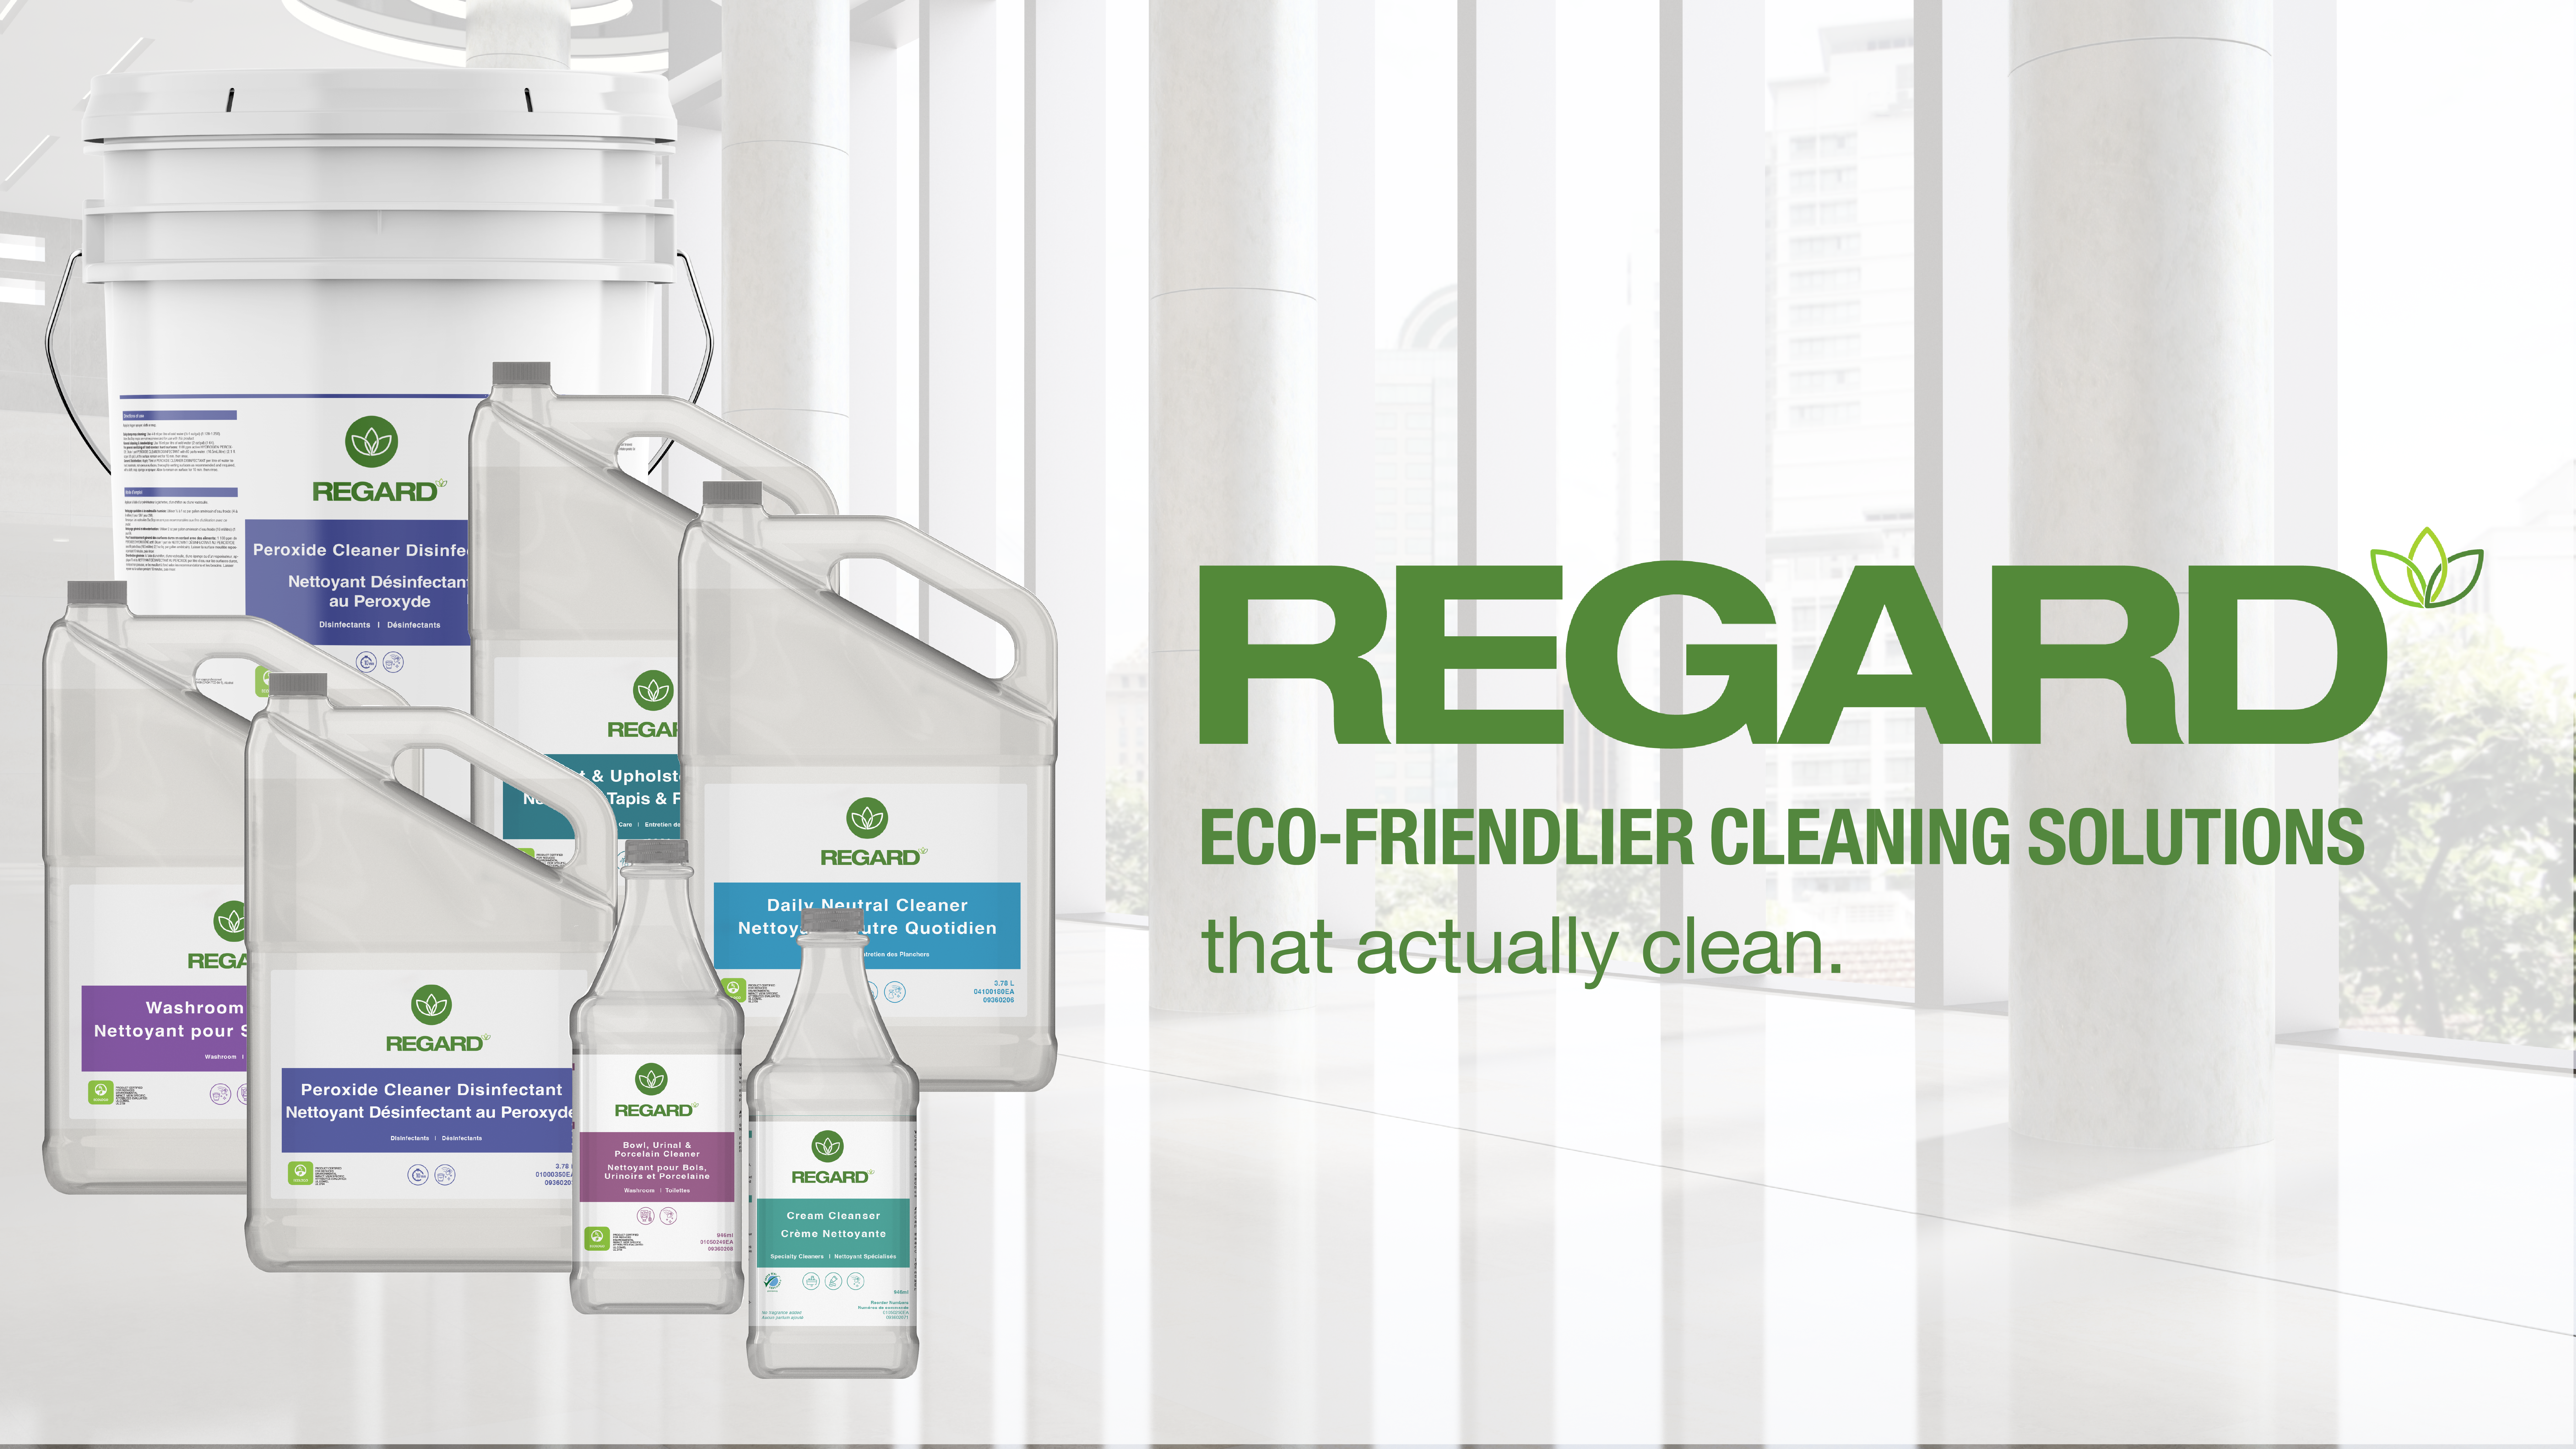 Regard Eco-Friendlier Cleaning Solutions Family of Products Promotional Image